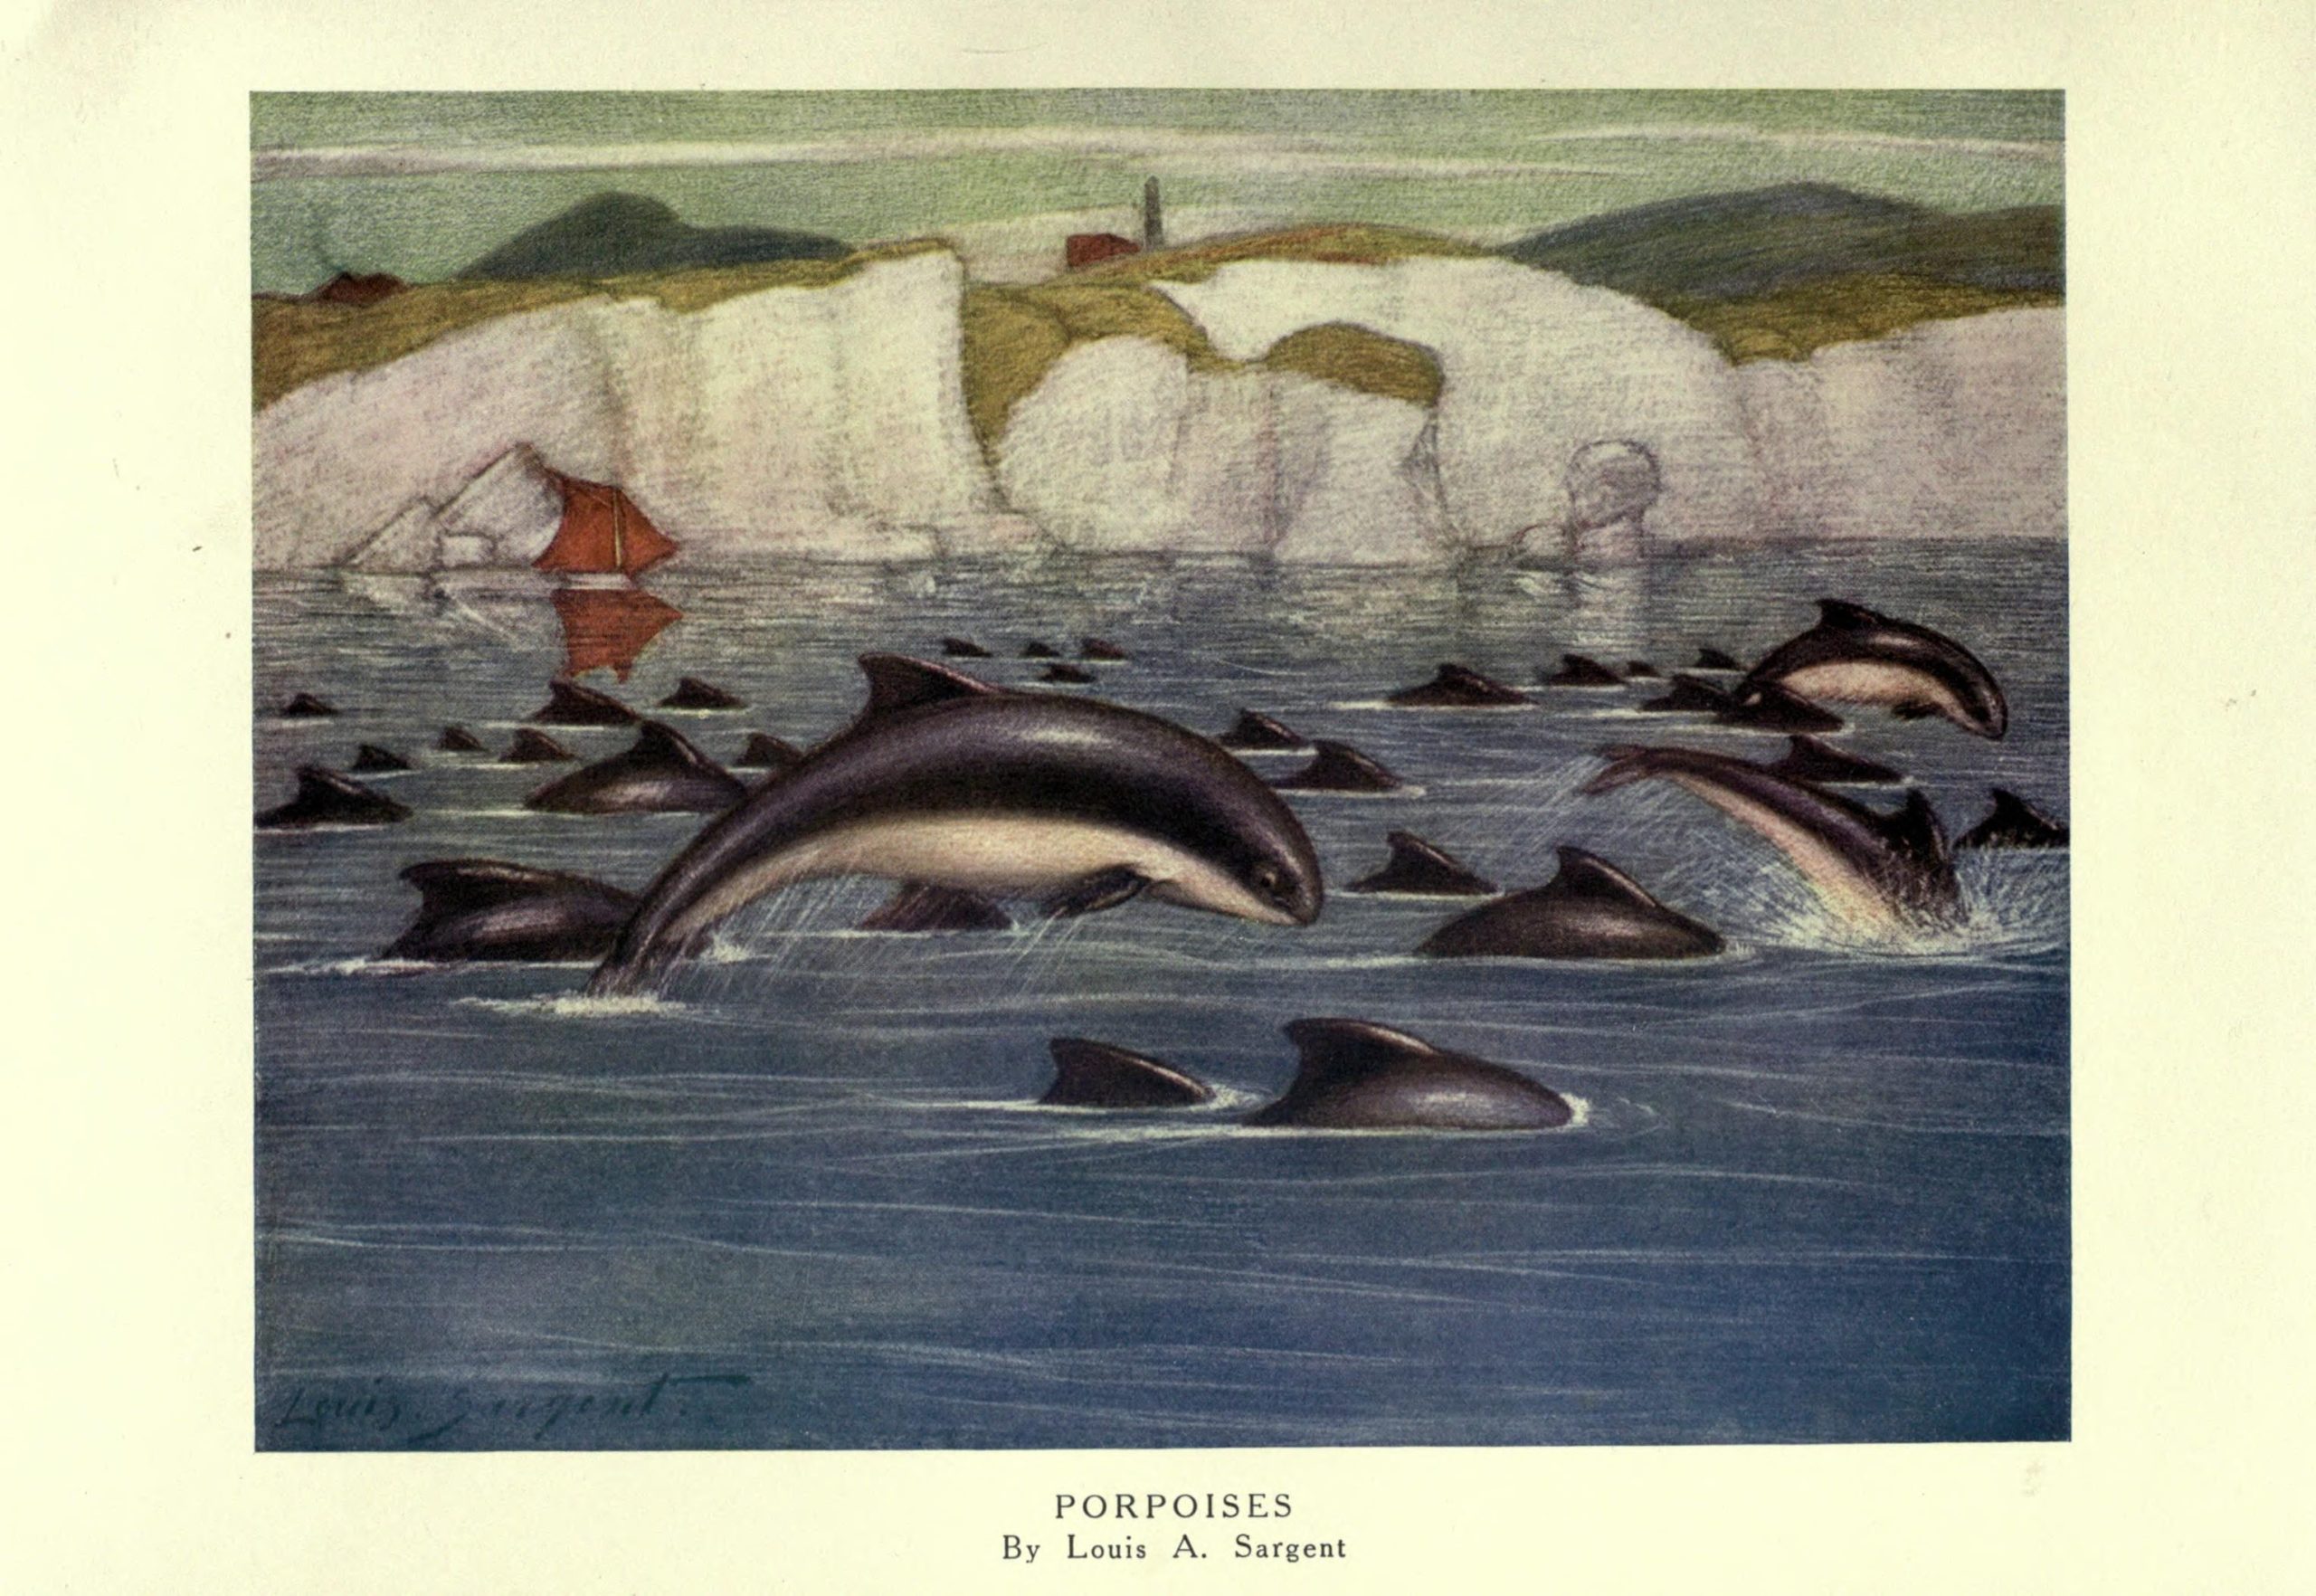 Porpoises swimming in the ocean with cliffs in the background